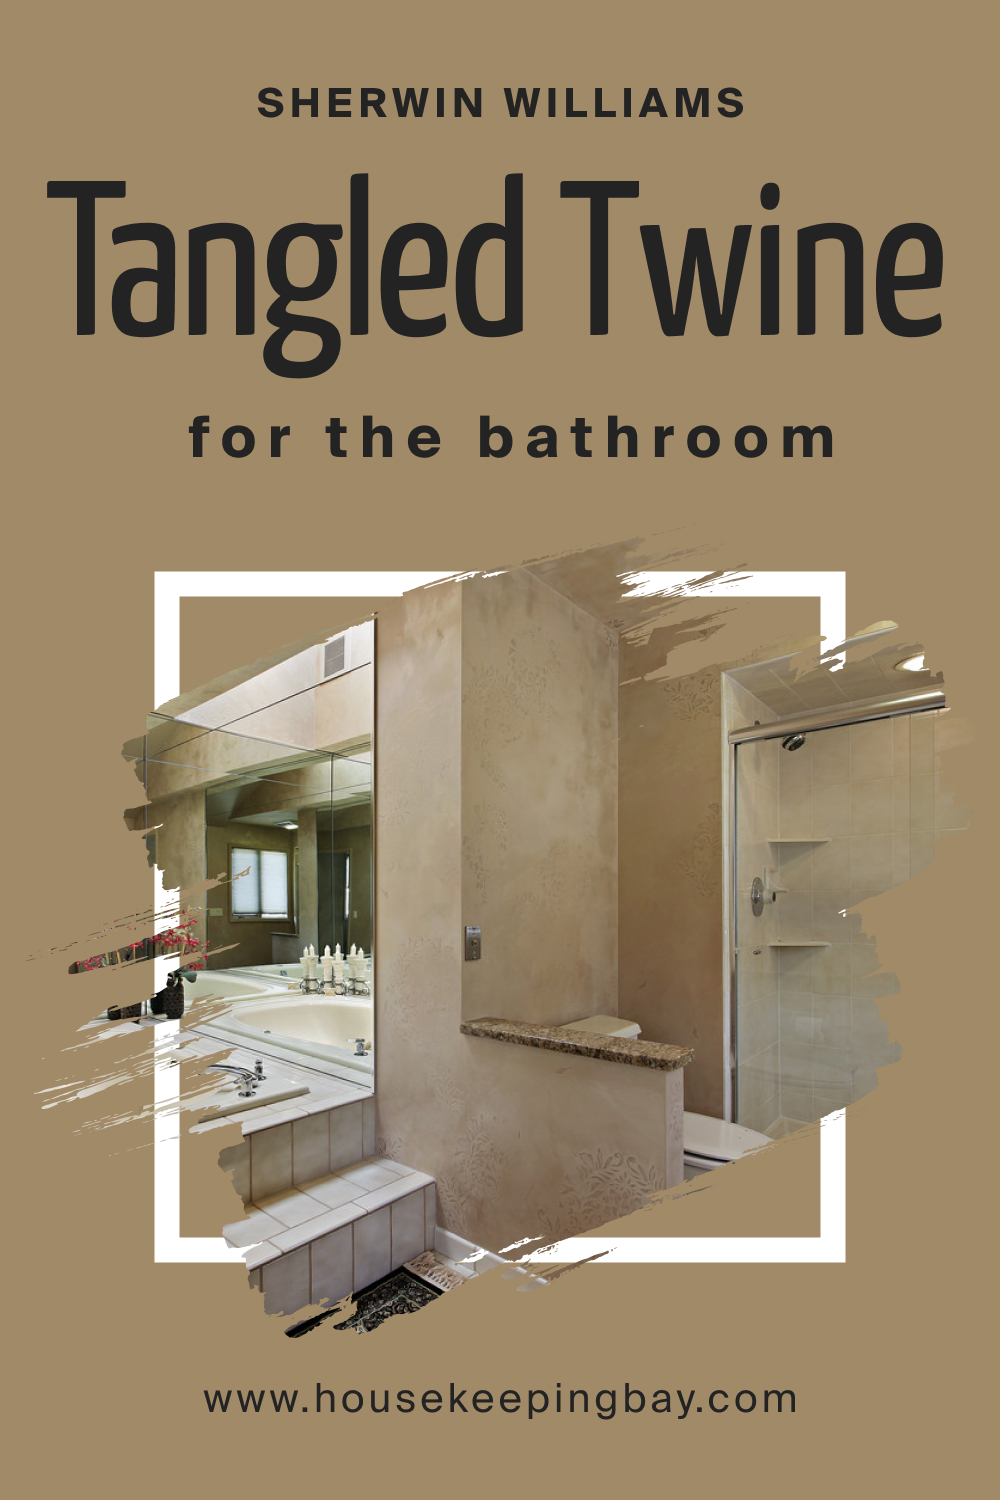 Sherwin Williams. SW 9538 Tangled Twine For the Bathroom